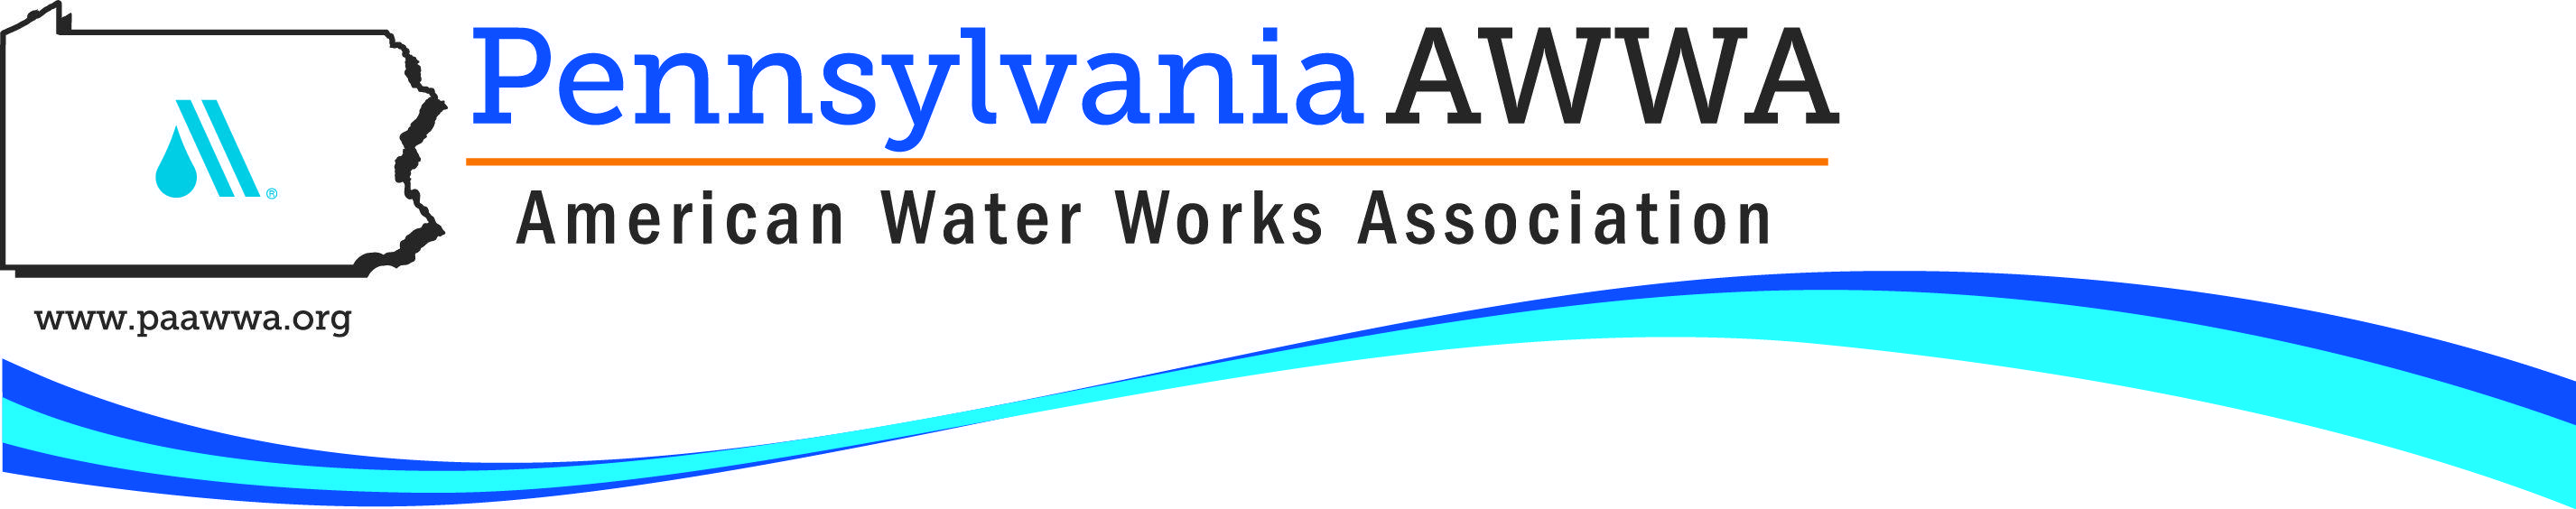 AWWA Logo - Annual Conference | American Water Works Association - Pennsylvania ...